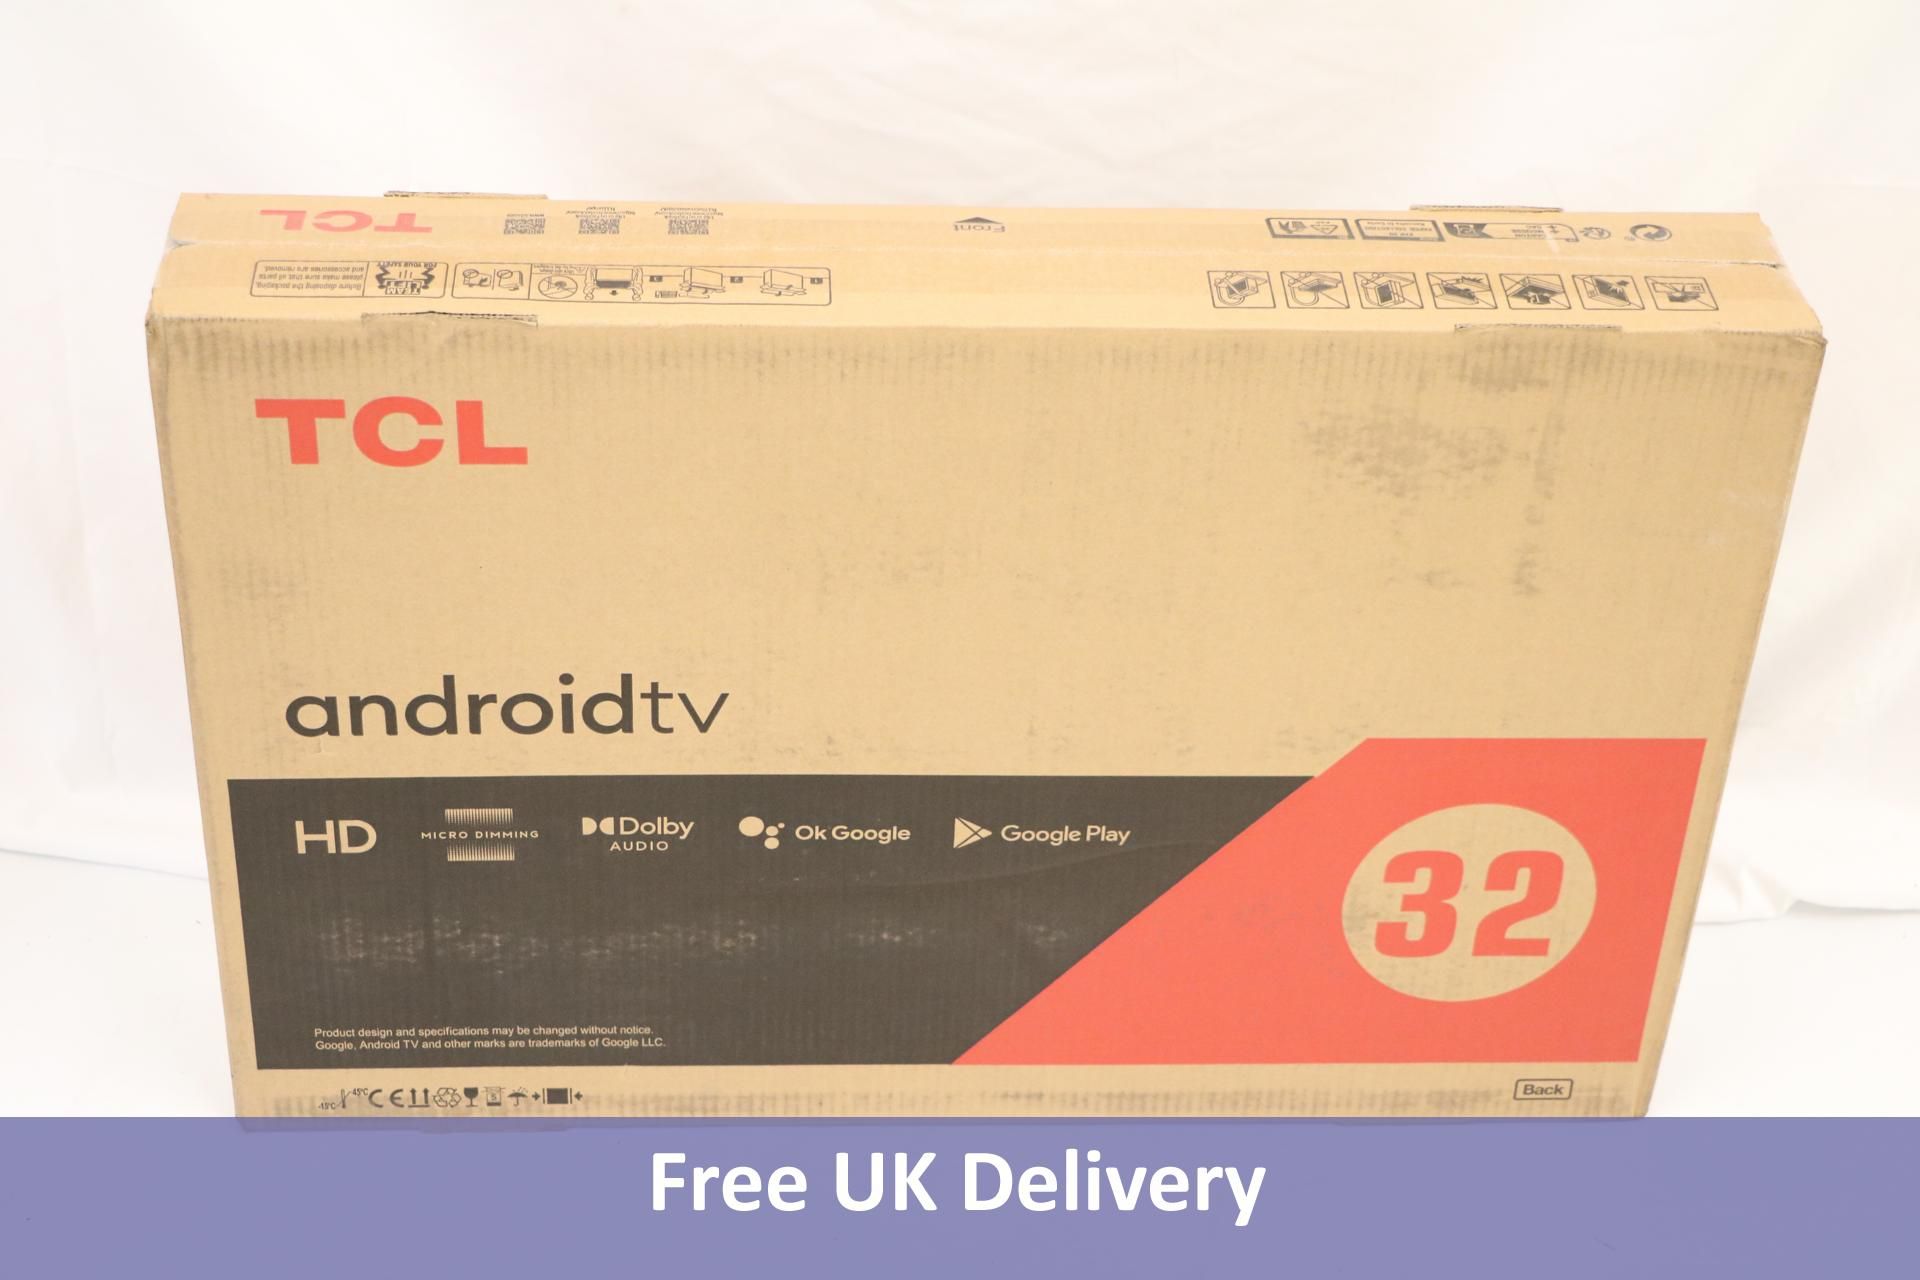 TCL 32S5209K 32-inch HD Smart Television with Android TV. Box damaged, not checked